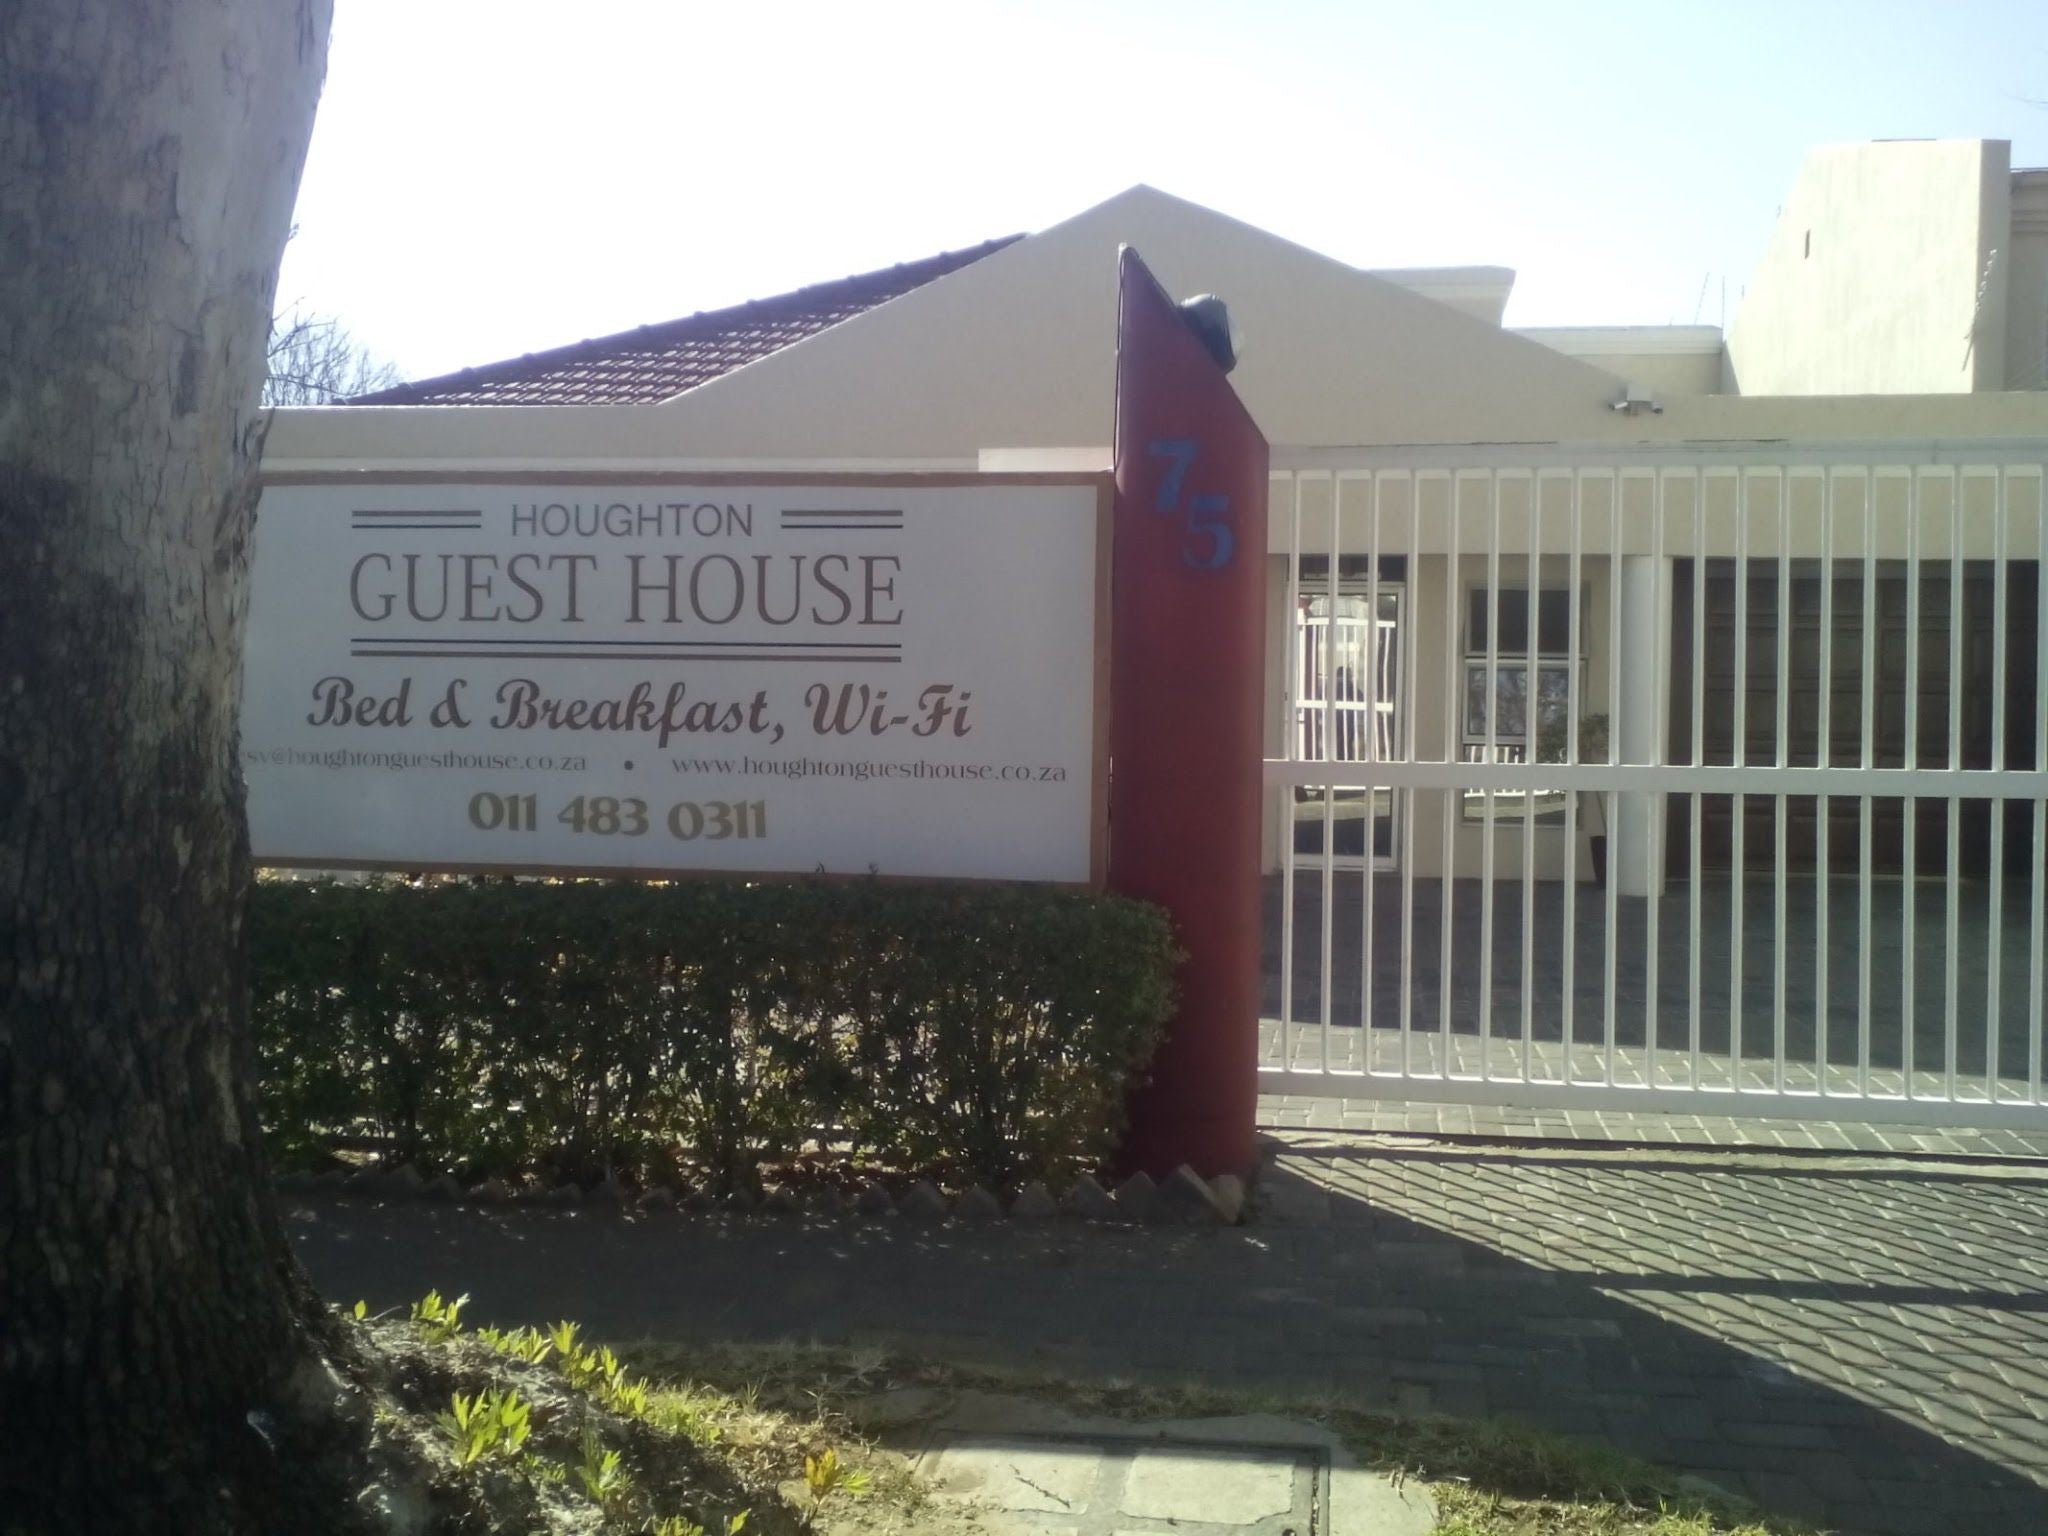 Houghton Guest House Norwood Johannesburg Gauteng South Africa Unsaturated, House, Building, Architecture, Sign, Window